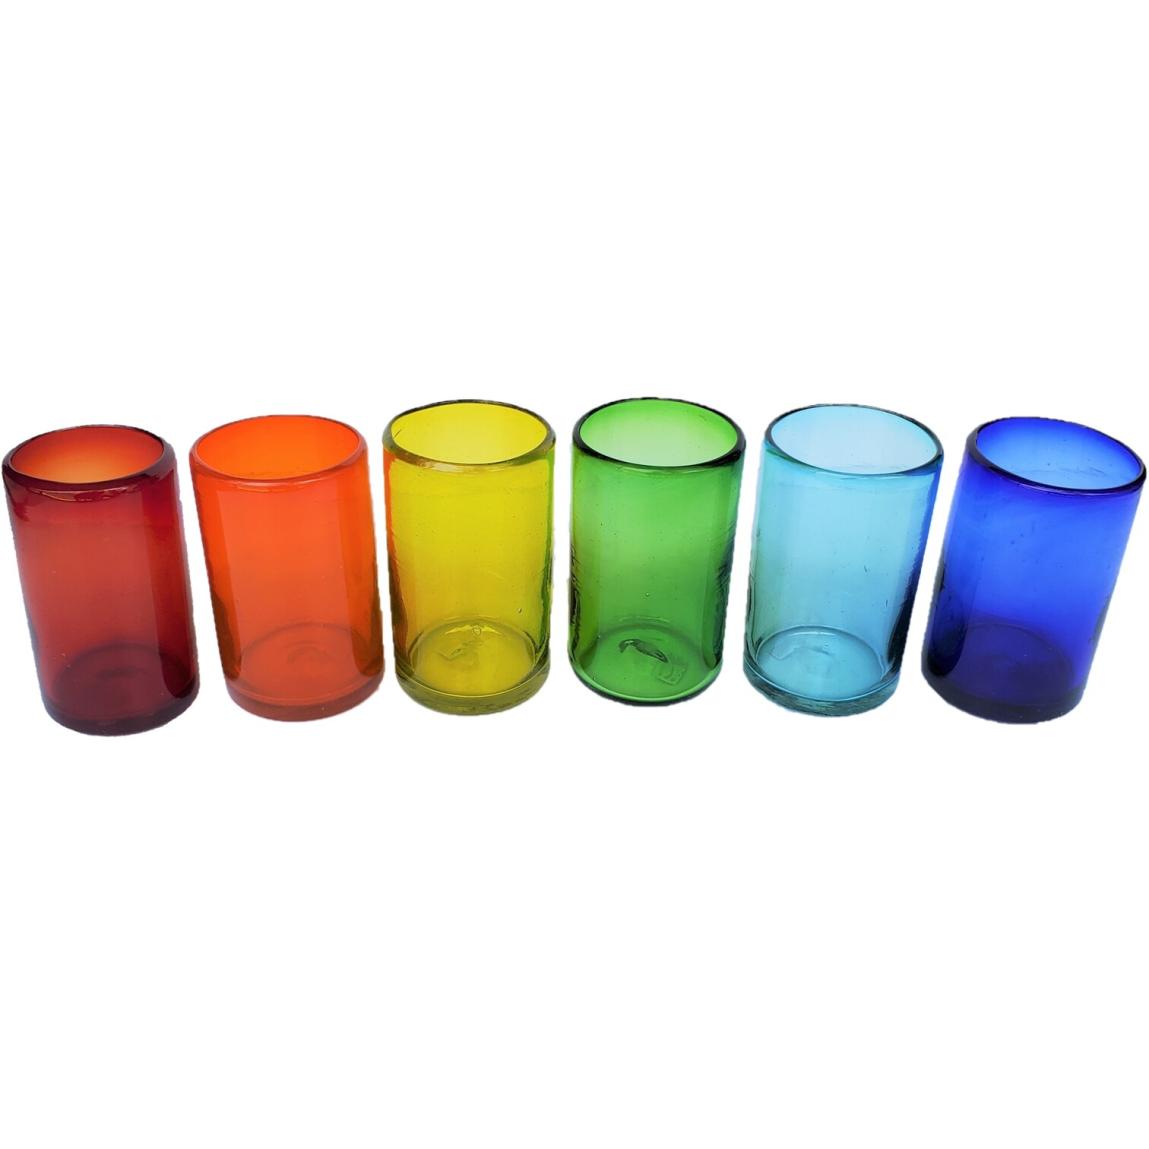 Mexican Glasses / Rainbow Colored 14 oz Drinking Glasses (set of 6) / These handcrafted glasses deliver a classic touch to your favorite drink.